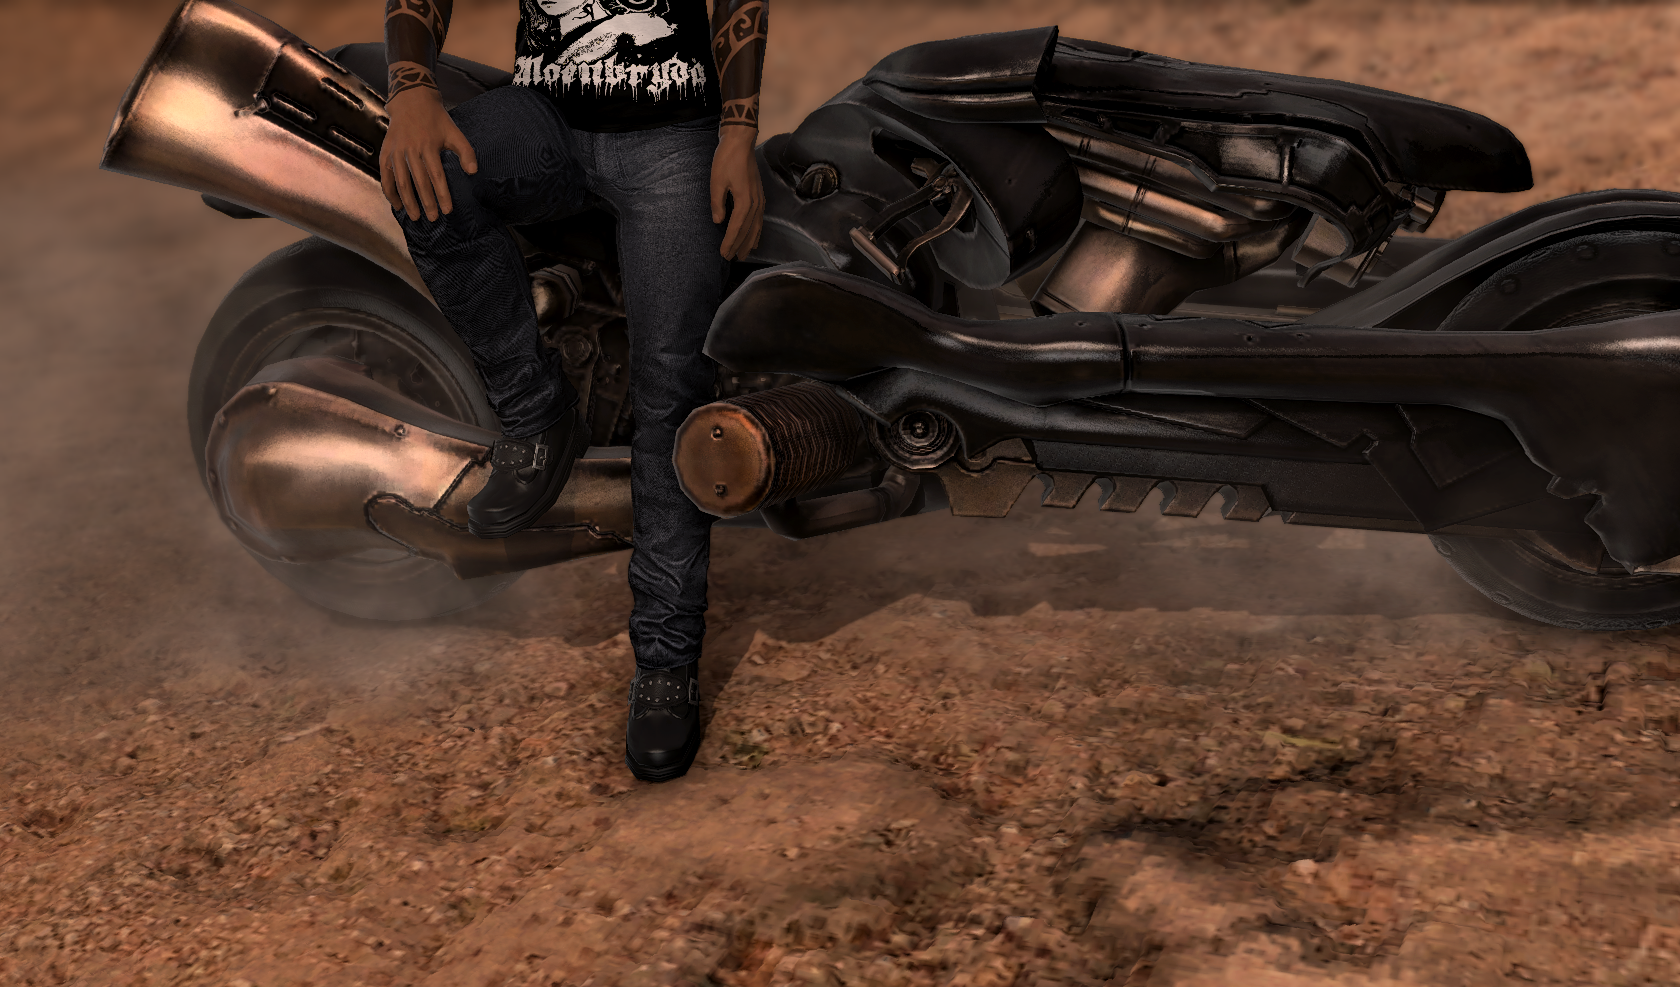 A bike from the FFXIV game. A man with tattoos and black clothes leans on it but you can't see above his elbows